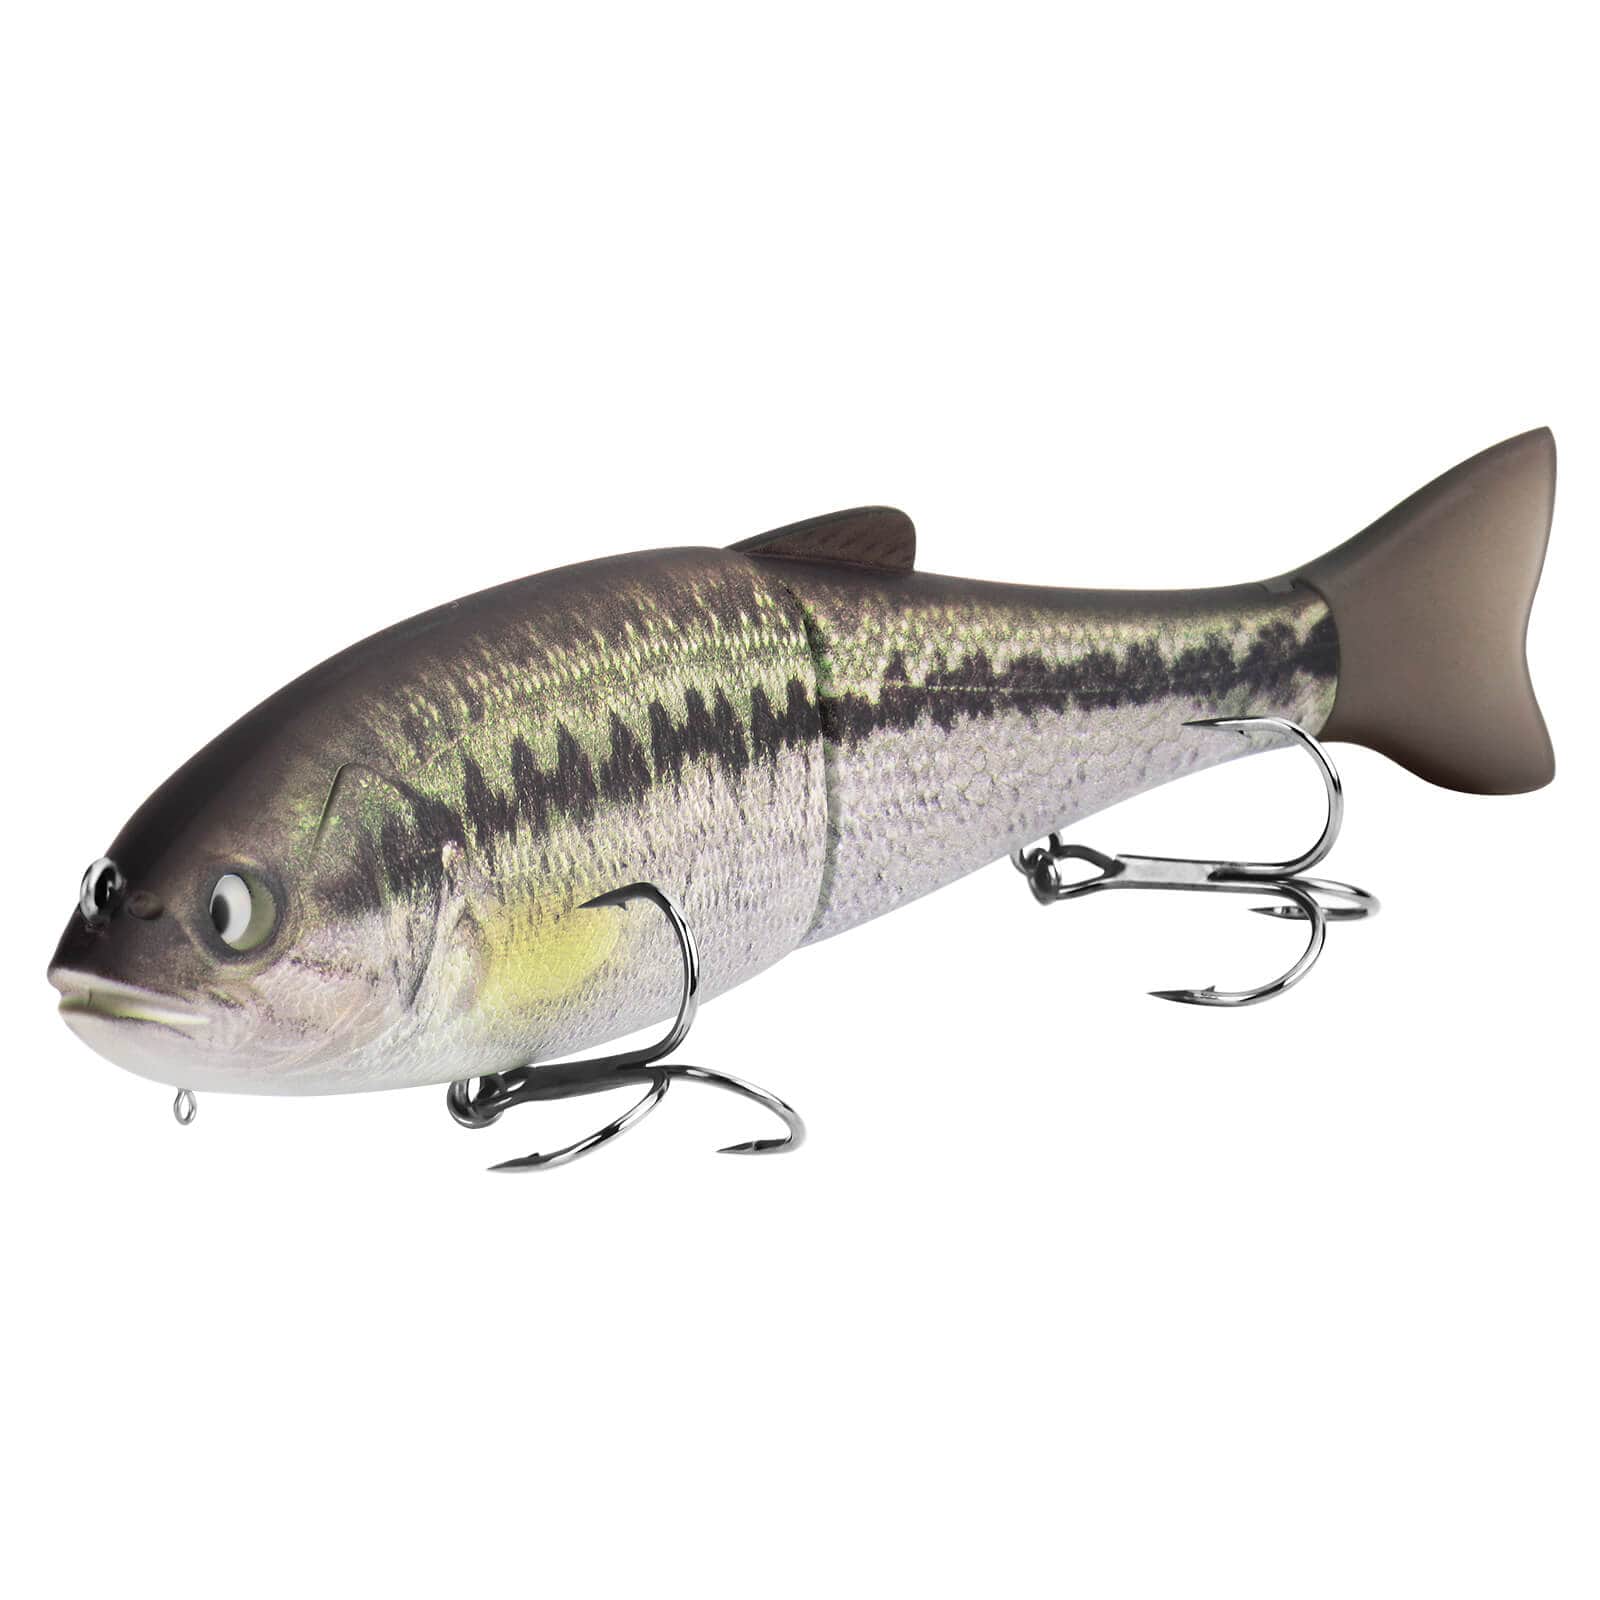 MadBite 5 / 8 Jointed Swimbaits - Baby bass Trout Glide Bait / 8